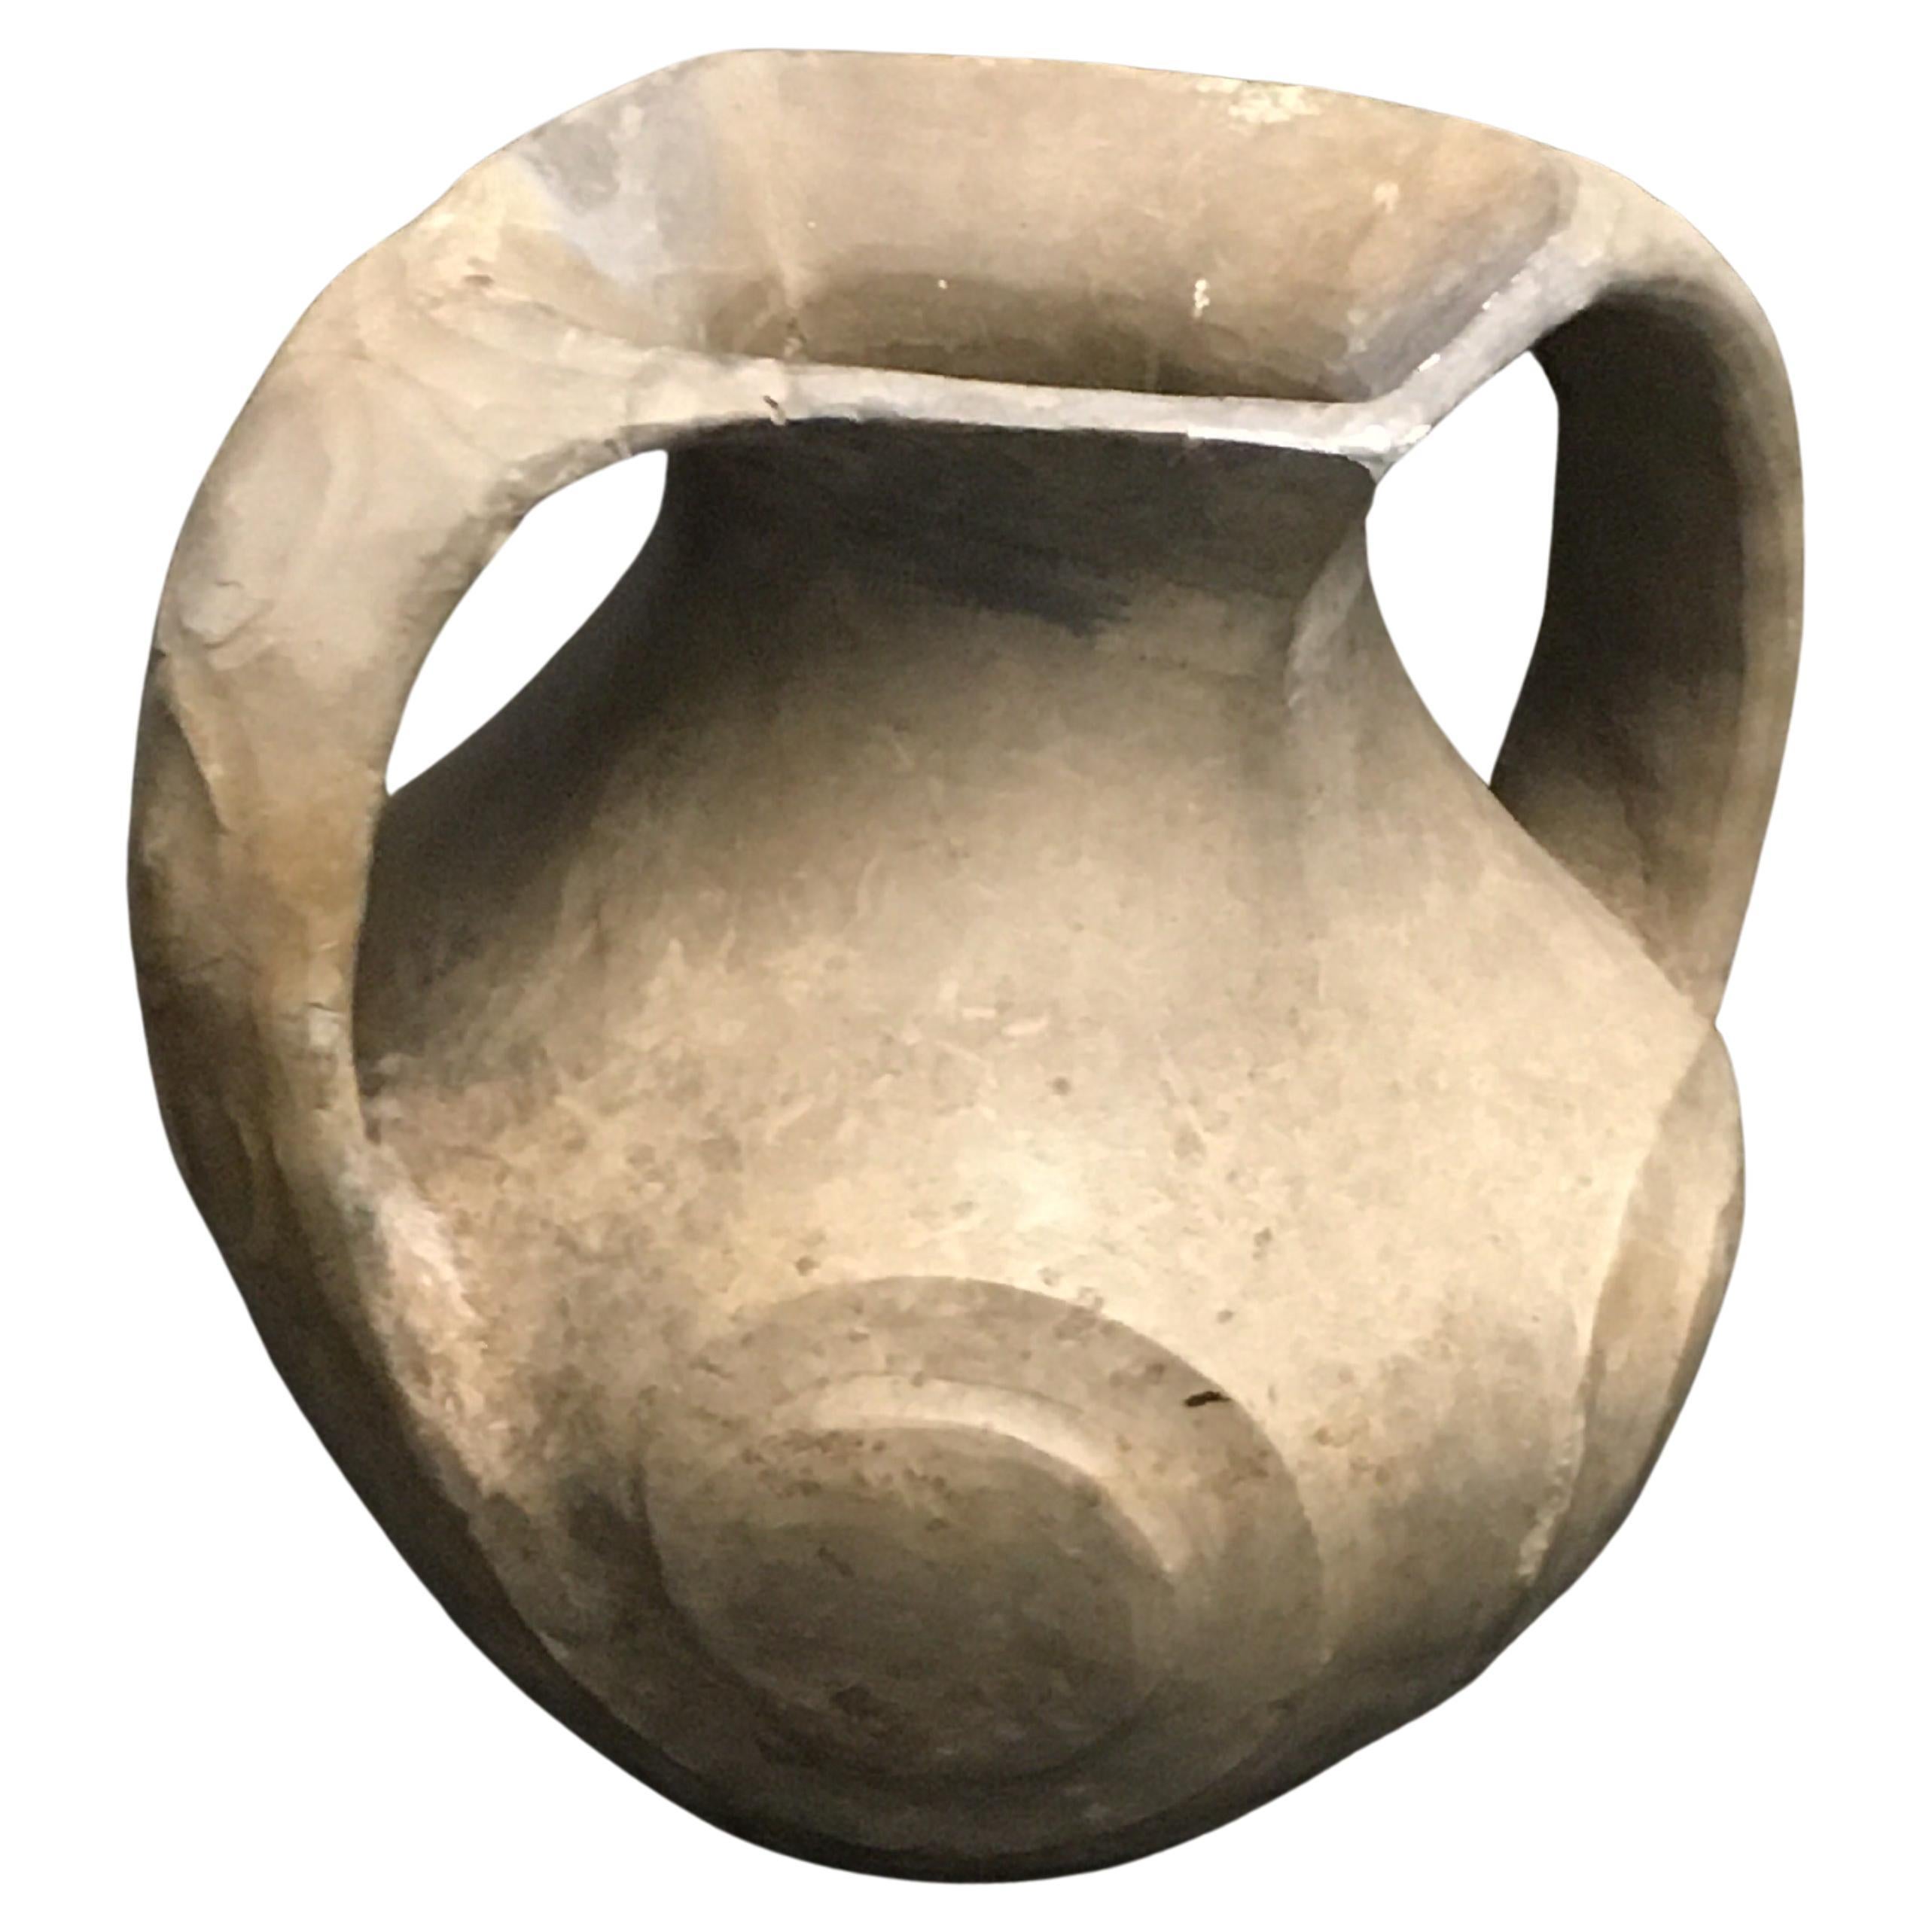 Sichuan Burnished Black Han Dynasty Pottery Amphora Vase

Of pear form with a vertically incised band around the neck beneath a lozenge-shaped opening at the mouth, the two loop handles resolving into four raised scrolls on the body supported on a